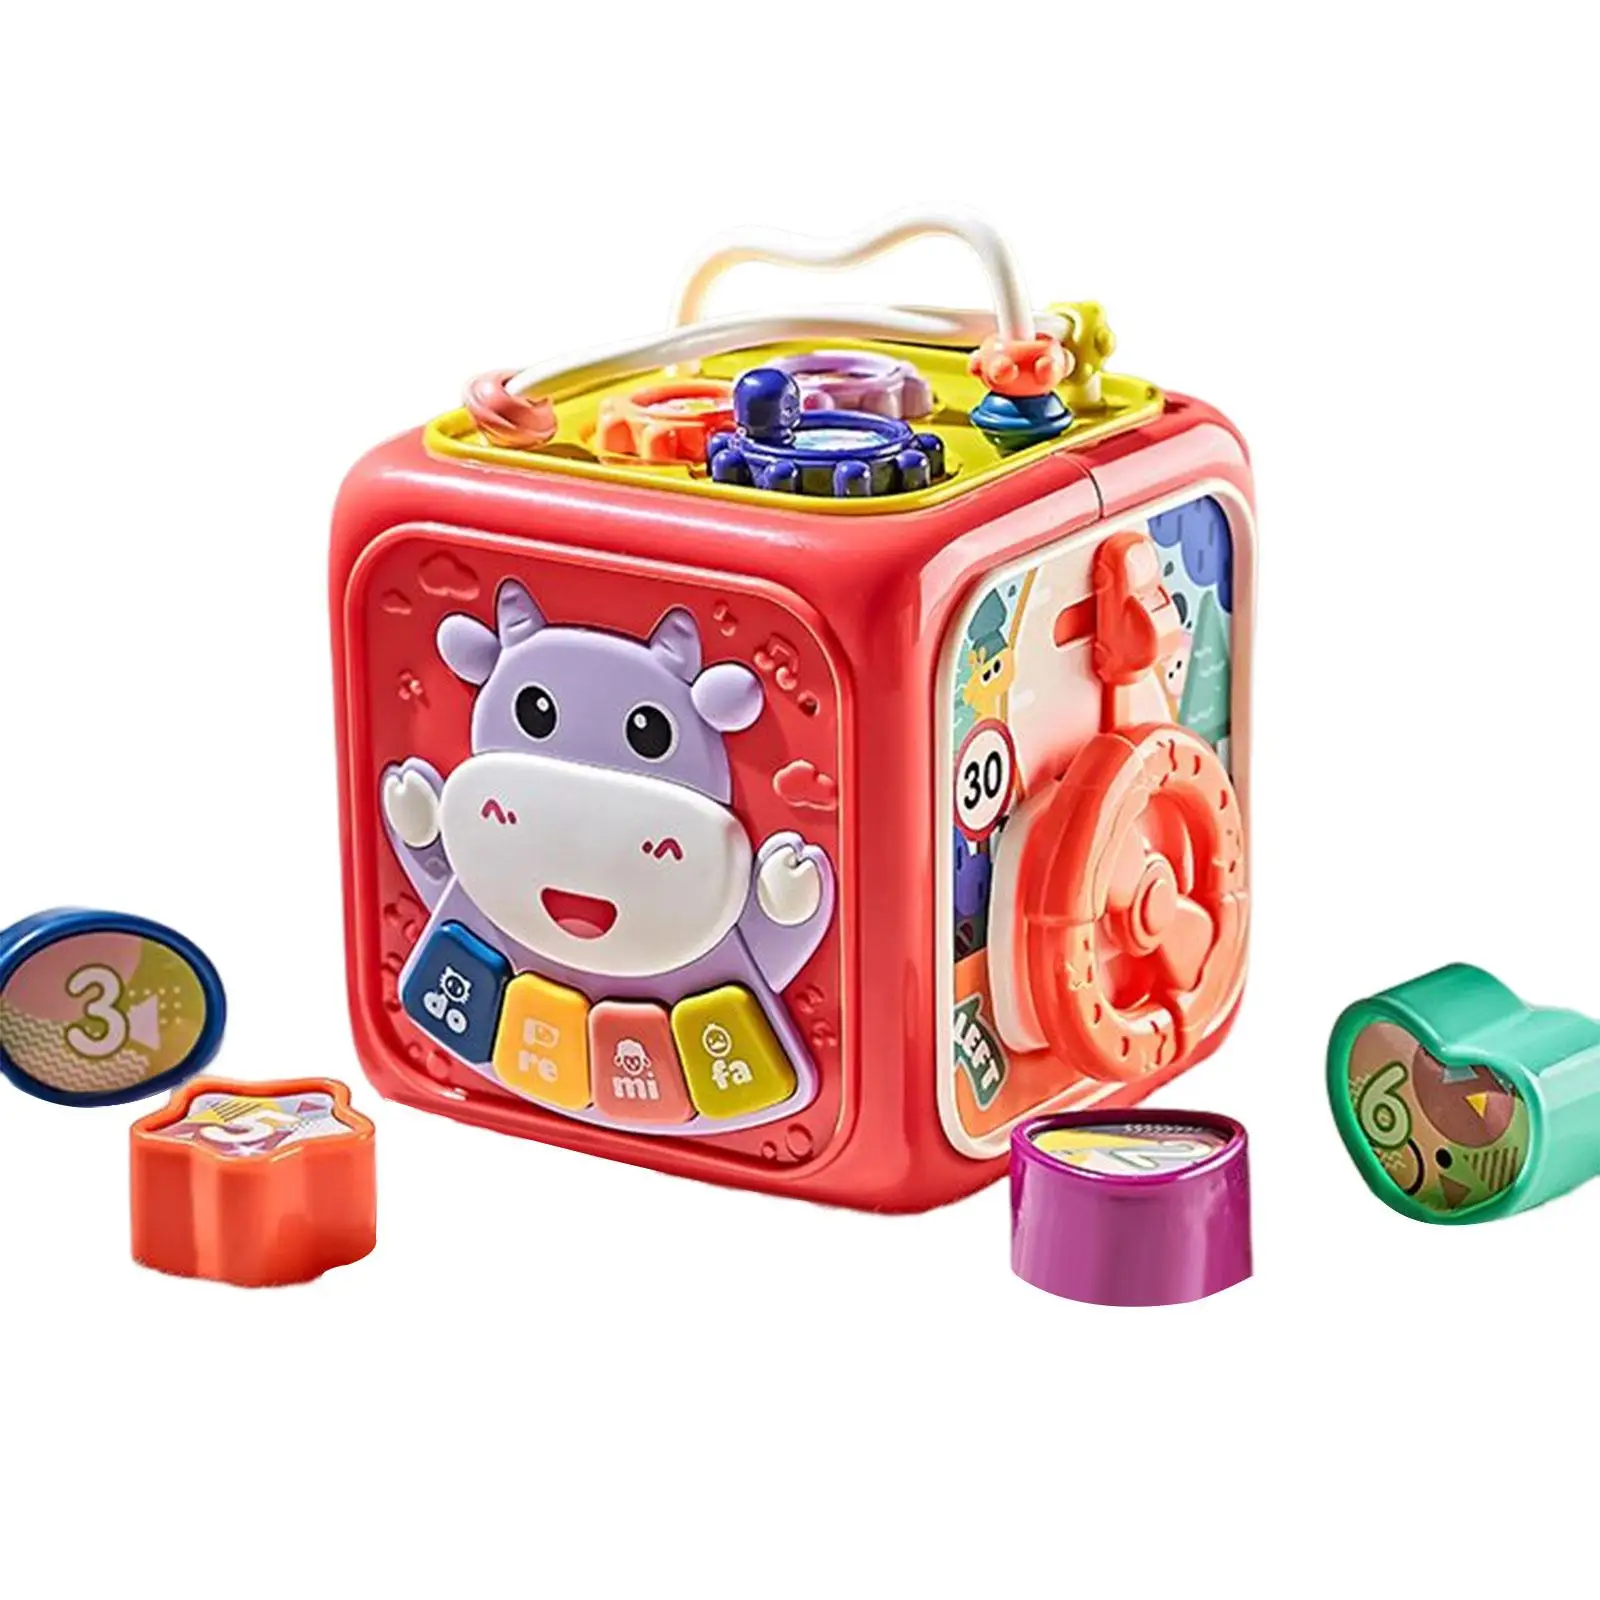 Musical Activity Cube Baby Musical Toys, Multi Functions, 6 Sided Activity Center for Age 1 + Year Old 12-18 Months Boys Girls